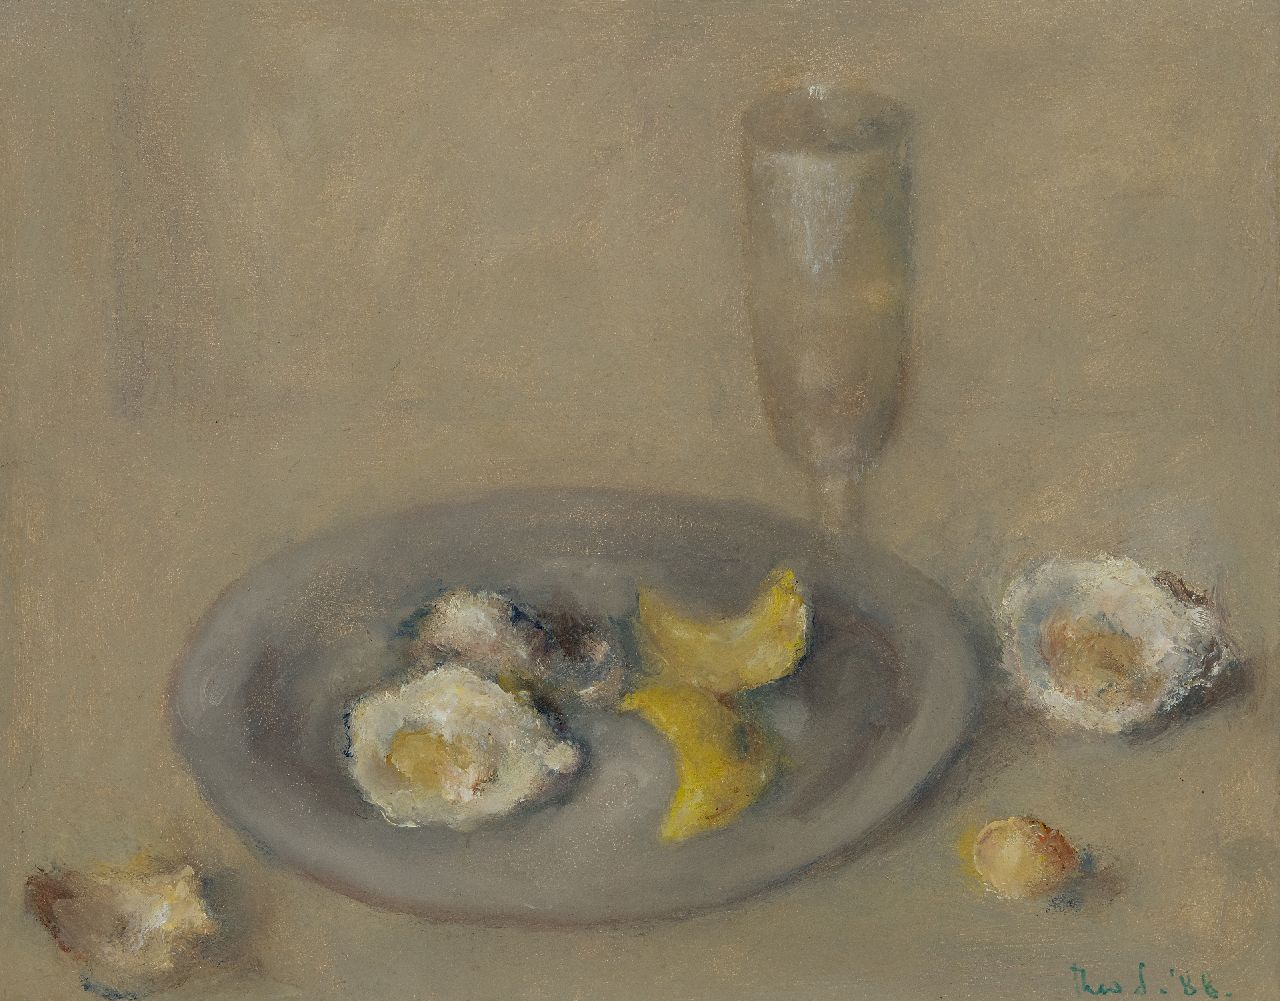 Swagemakers T.  | Theo Swagemakers, Still life with oysters and lemon peels on a pewter plate, oil on panel 39.5 x 49.4 cm, signed l.r. and dated '88